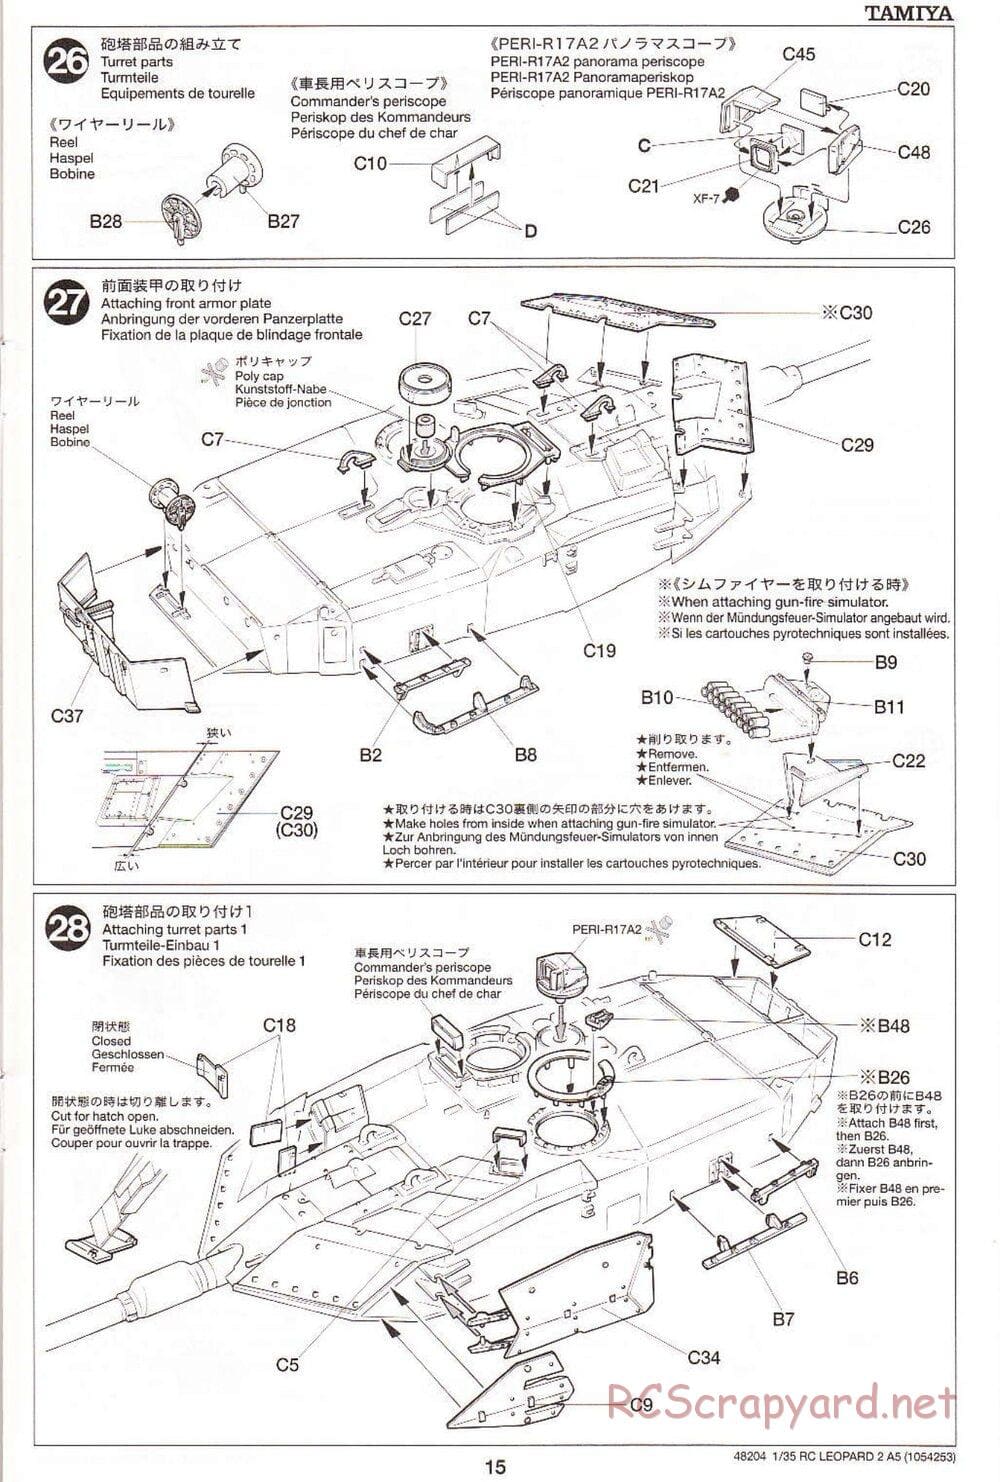 Tamiya - Leopard 2 A5 Main Battle Tank - 1/35 Scale Chassis - Manual - Page 15